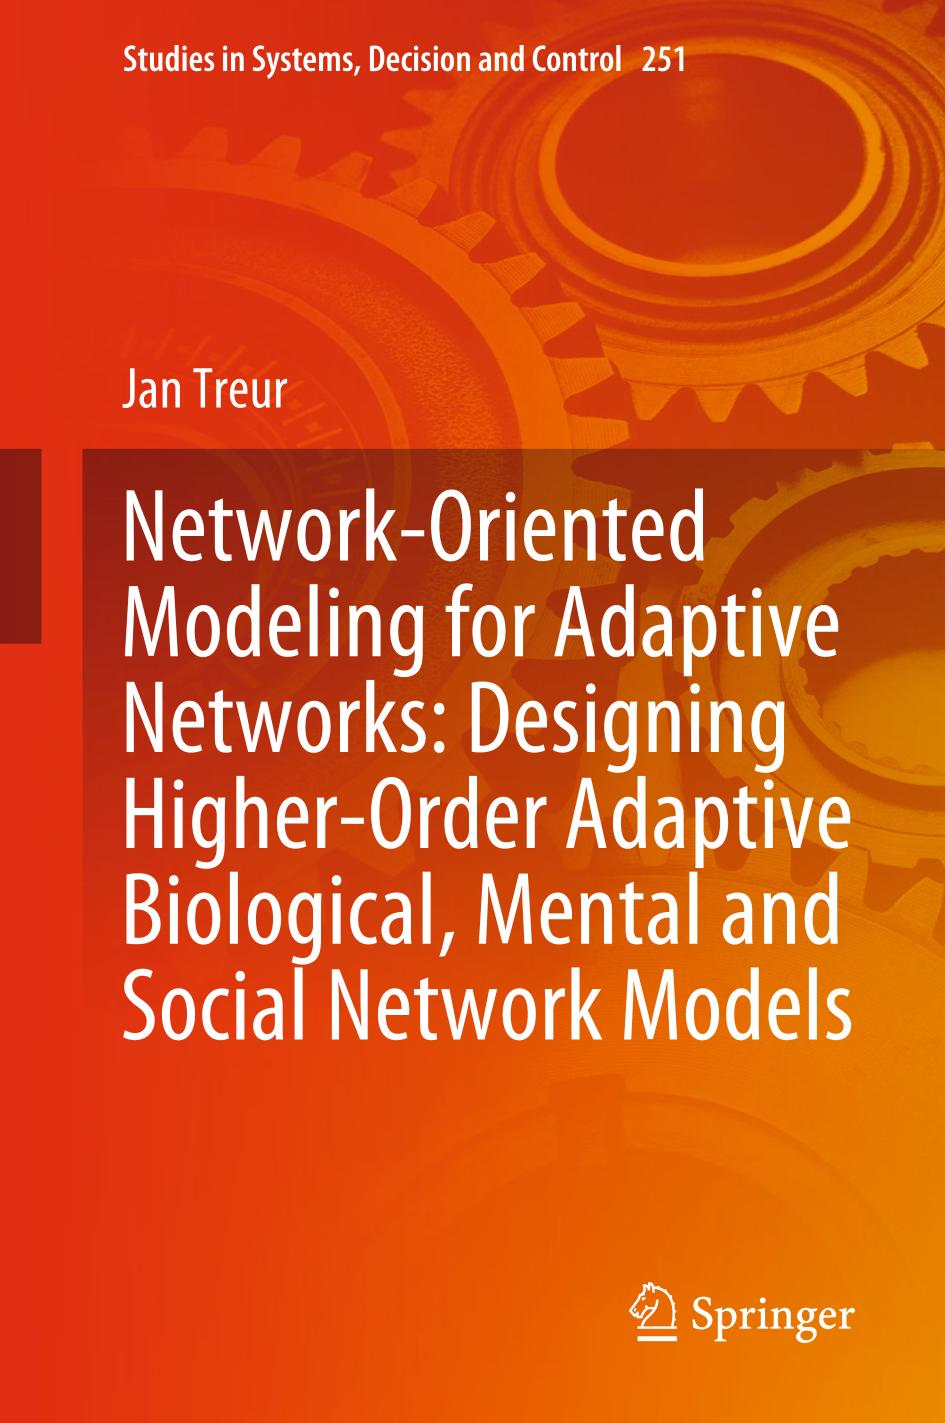 Network-Oriented Modeling for Adaptive Networks